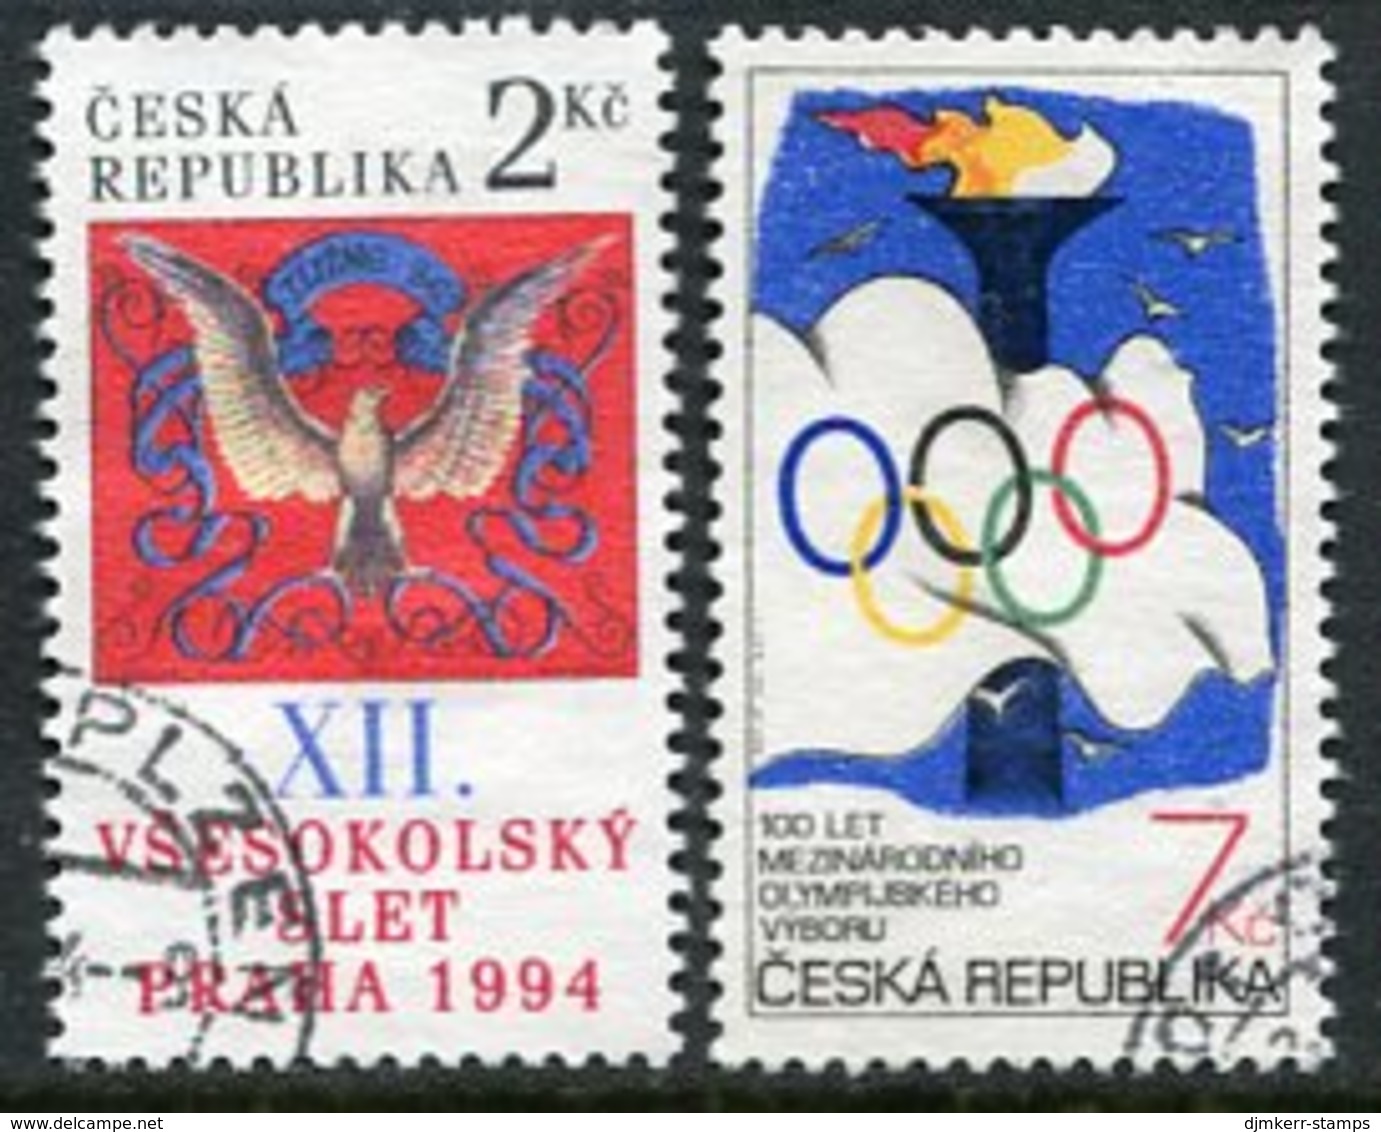 CZECH REPUBLIC 1994 Olympic Committee And Sokol Meeting Used,  Michel 46-47 - Used Stamps